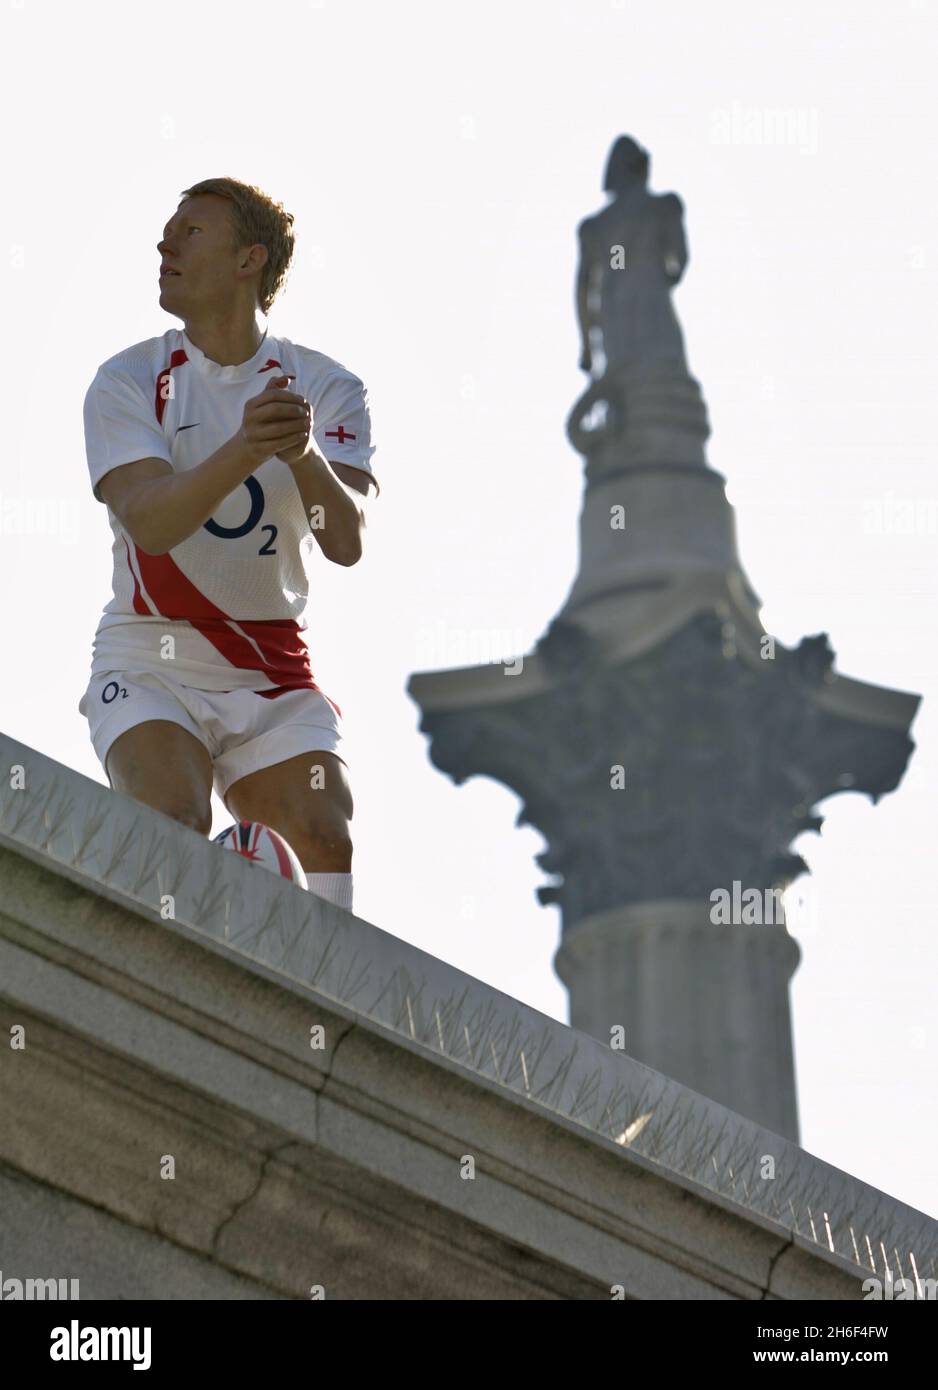 A waxwork of England's Jonny Wilkinson stands on the fourth plinth in Trafalgar Square, London, ahead of Rugby World Cup Final in Paris. Stock Photo